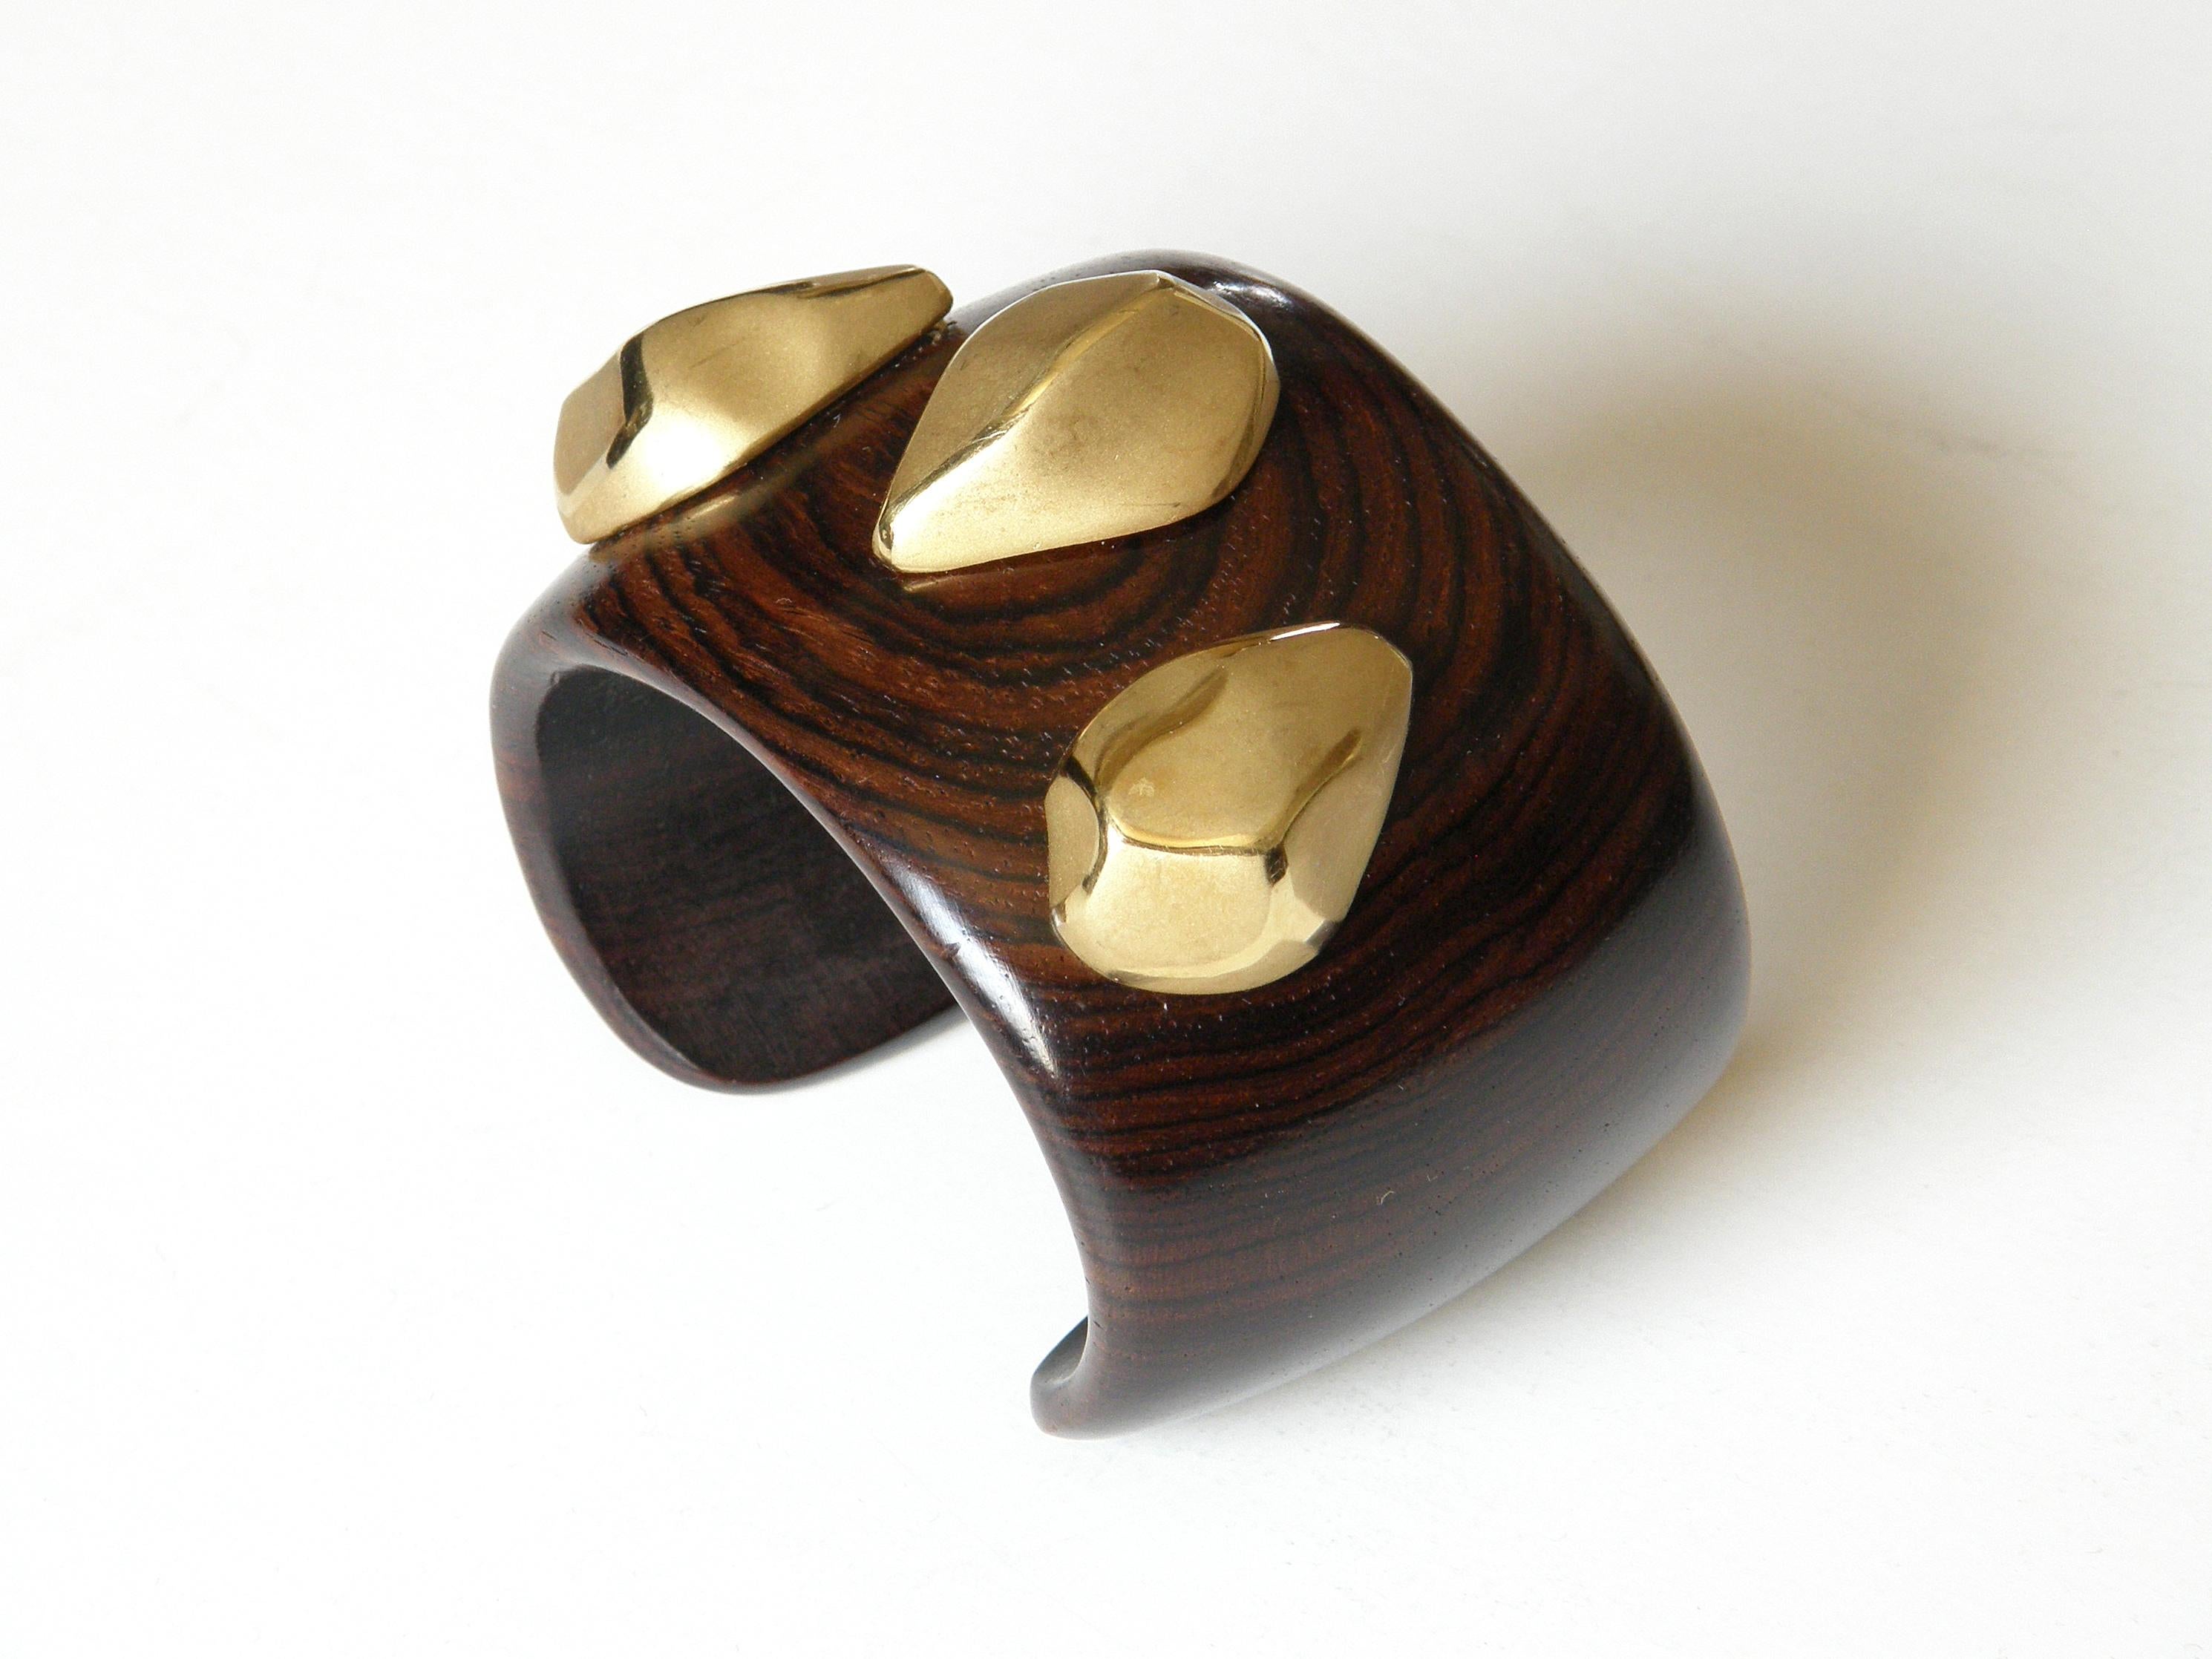 Modernist Sanalitro 18k Gold and Wood Cuff Bracelet and Clip on Earrings Set Made in Italy For Sale